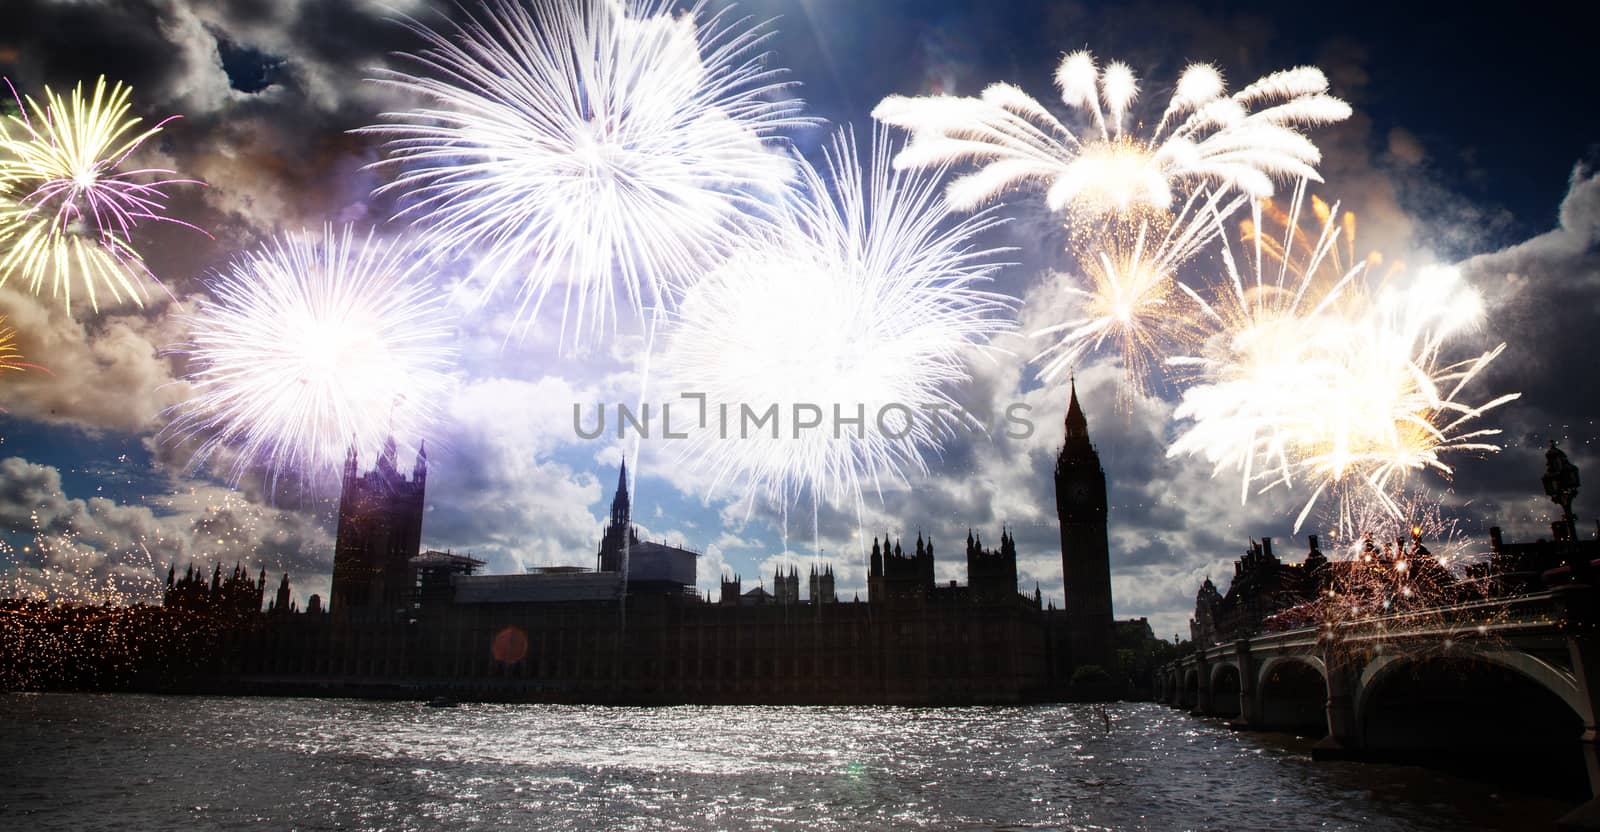  fireworks over Big Ben - new year celebrations in London, UK by melis